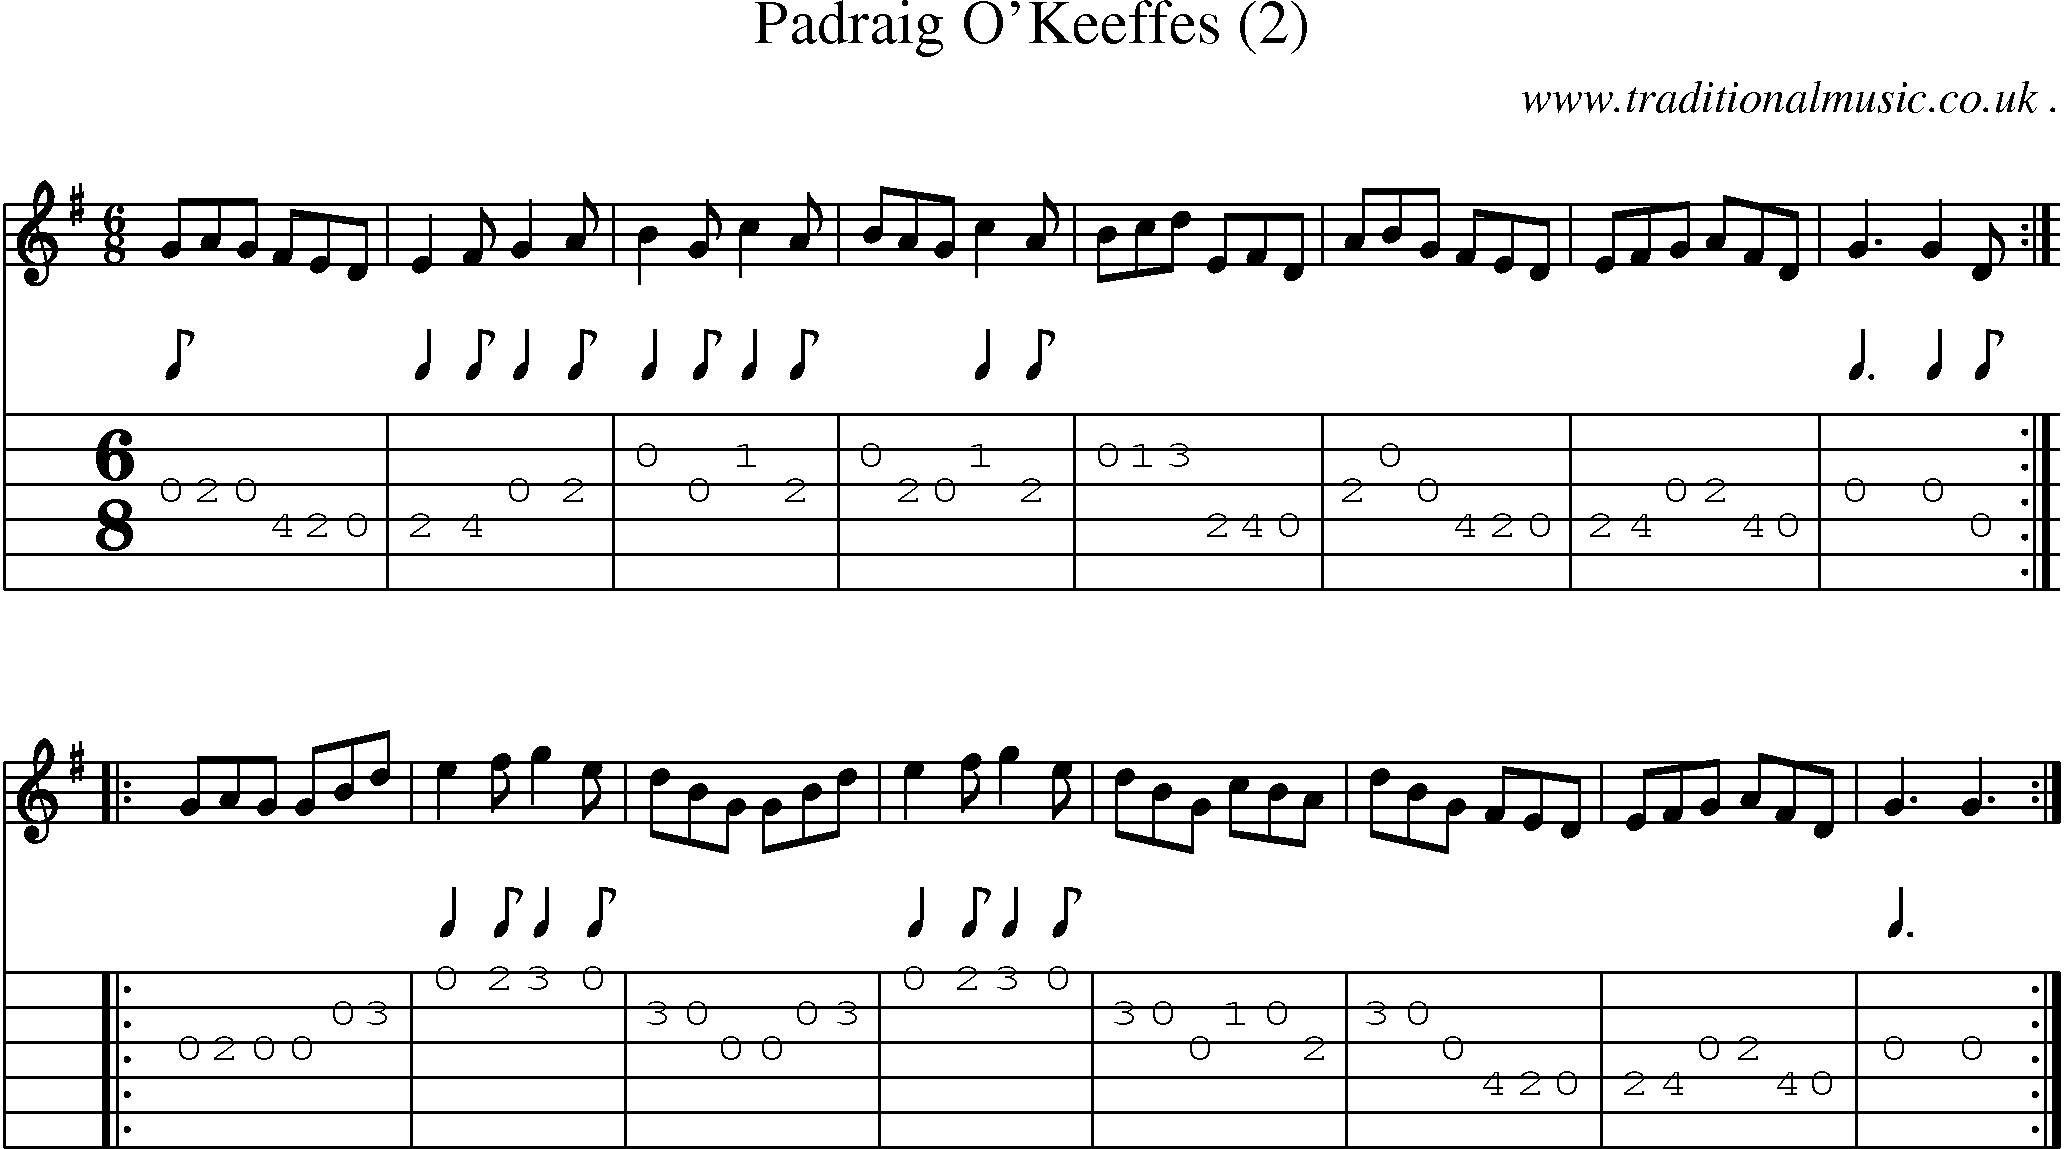 Sheet-Music and Guitar Tabs for Padraig Okeeffes (2)